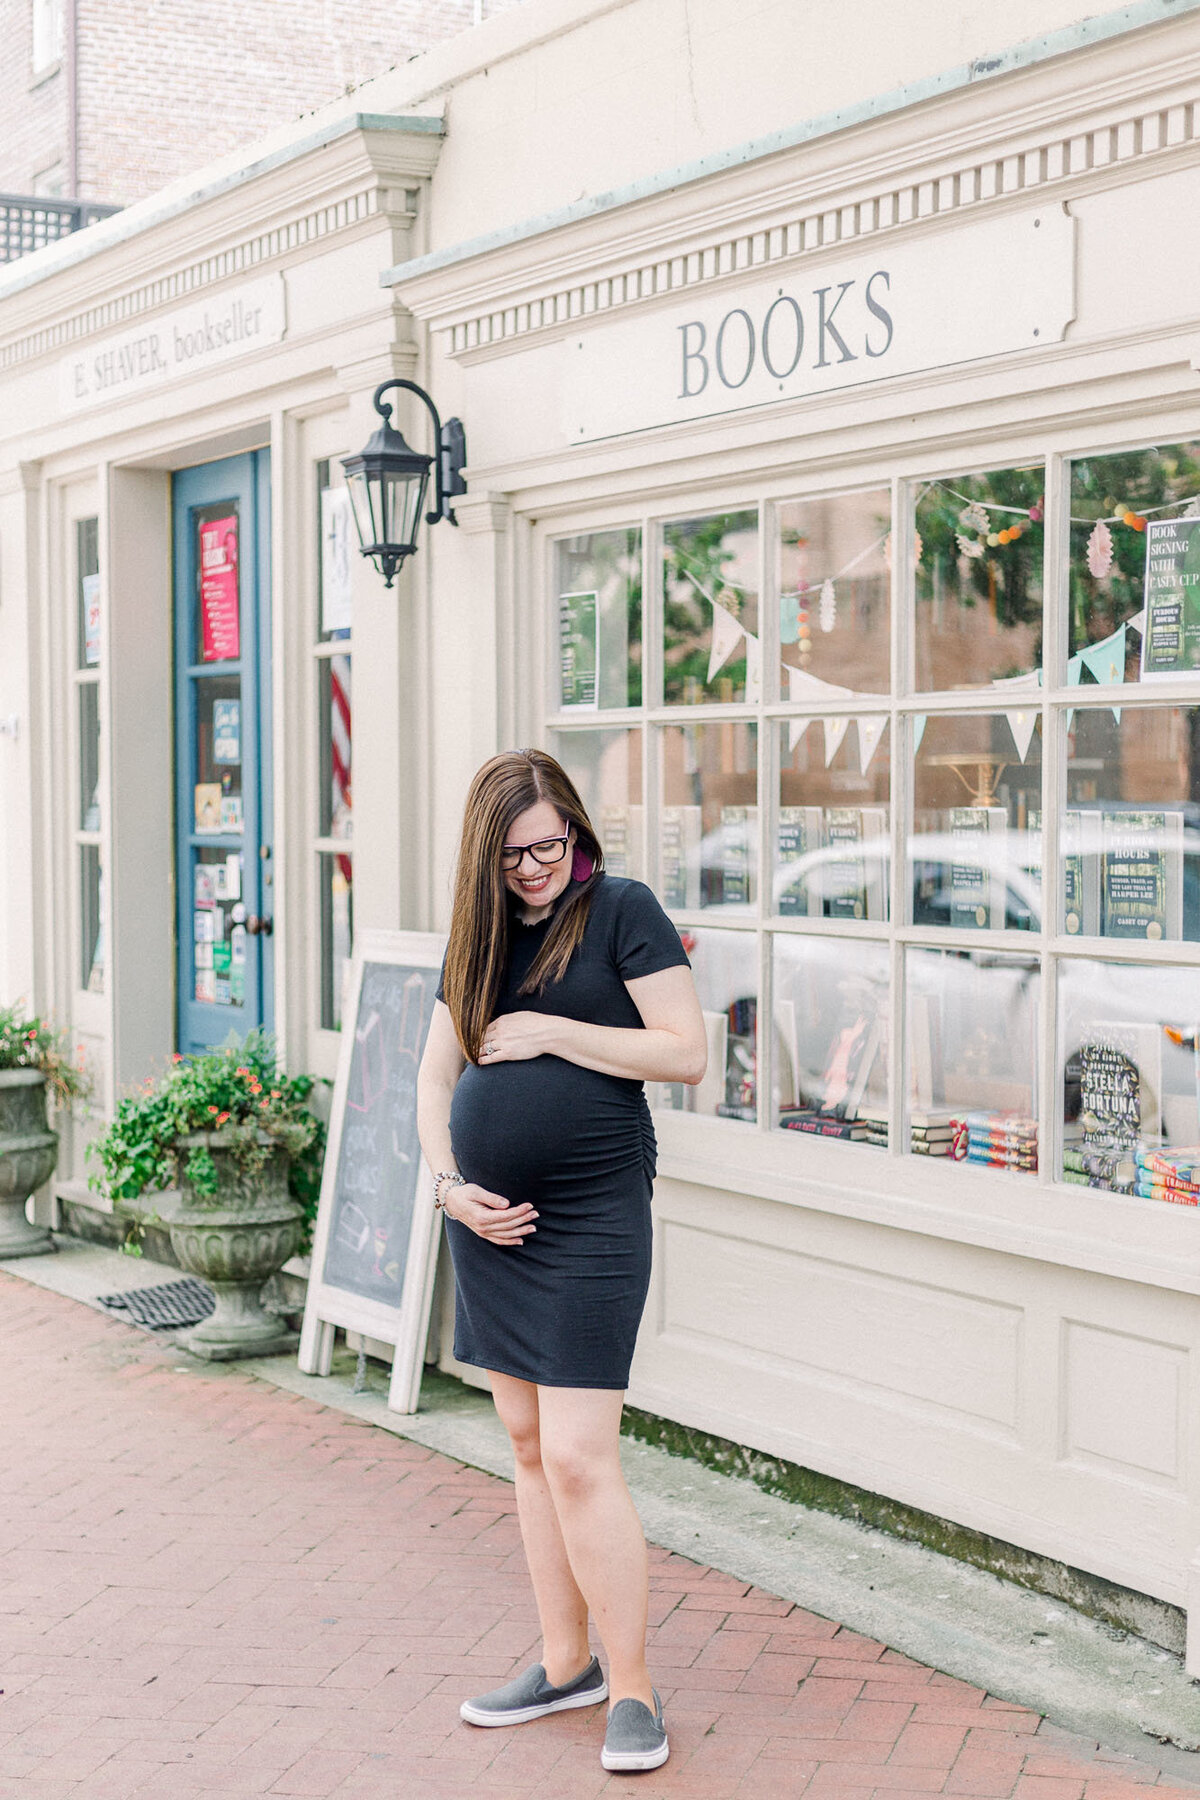 Maternity session in Savannah, Georgia captured by Staci Addison Photography